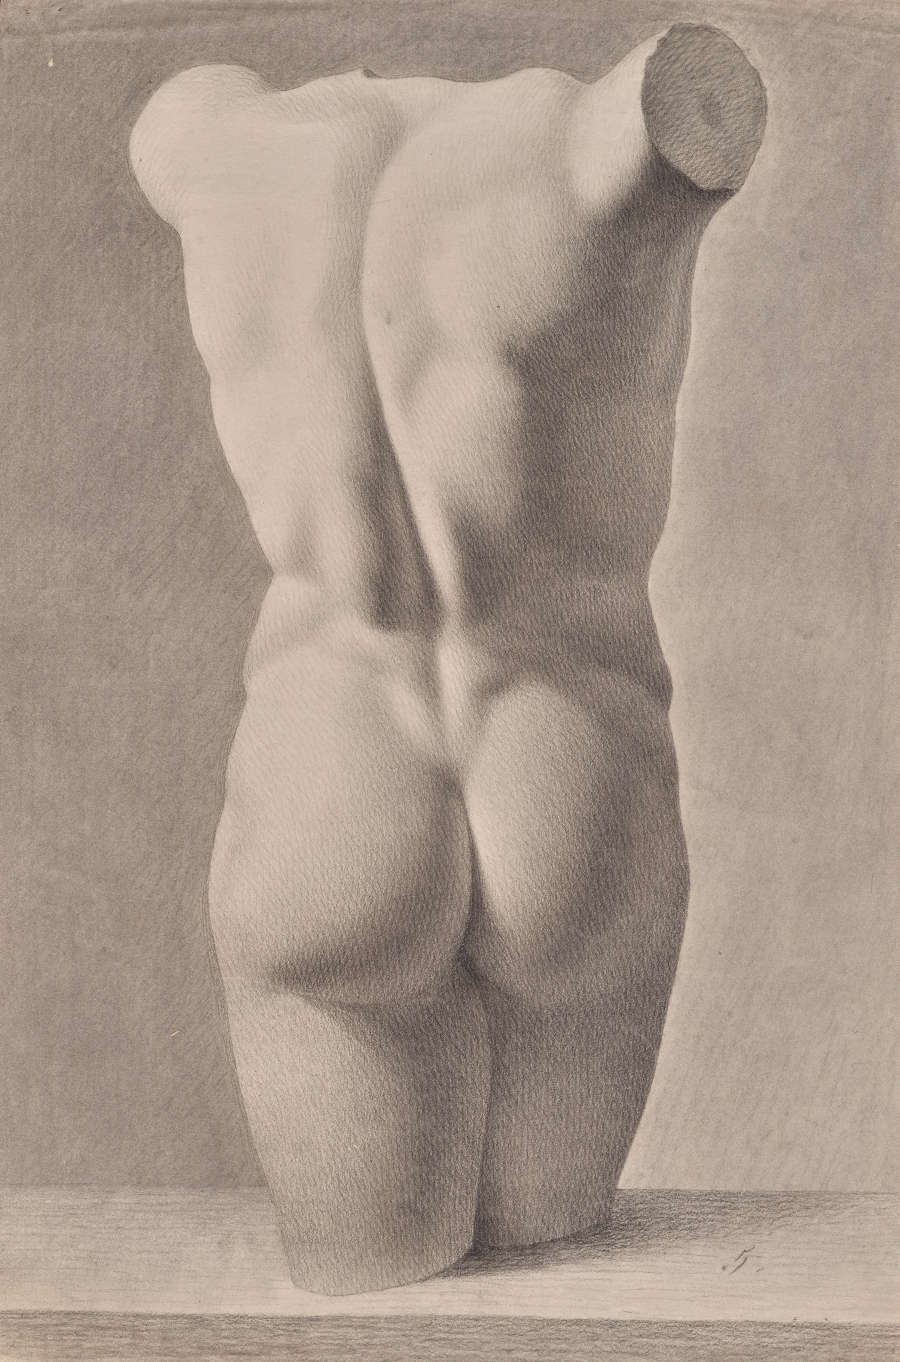 A charcoal drawing of a sculptural, nude male torso seen from behind. The figure is heavily shaded and detailed, and fine lines express detailed contours of the body.